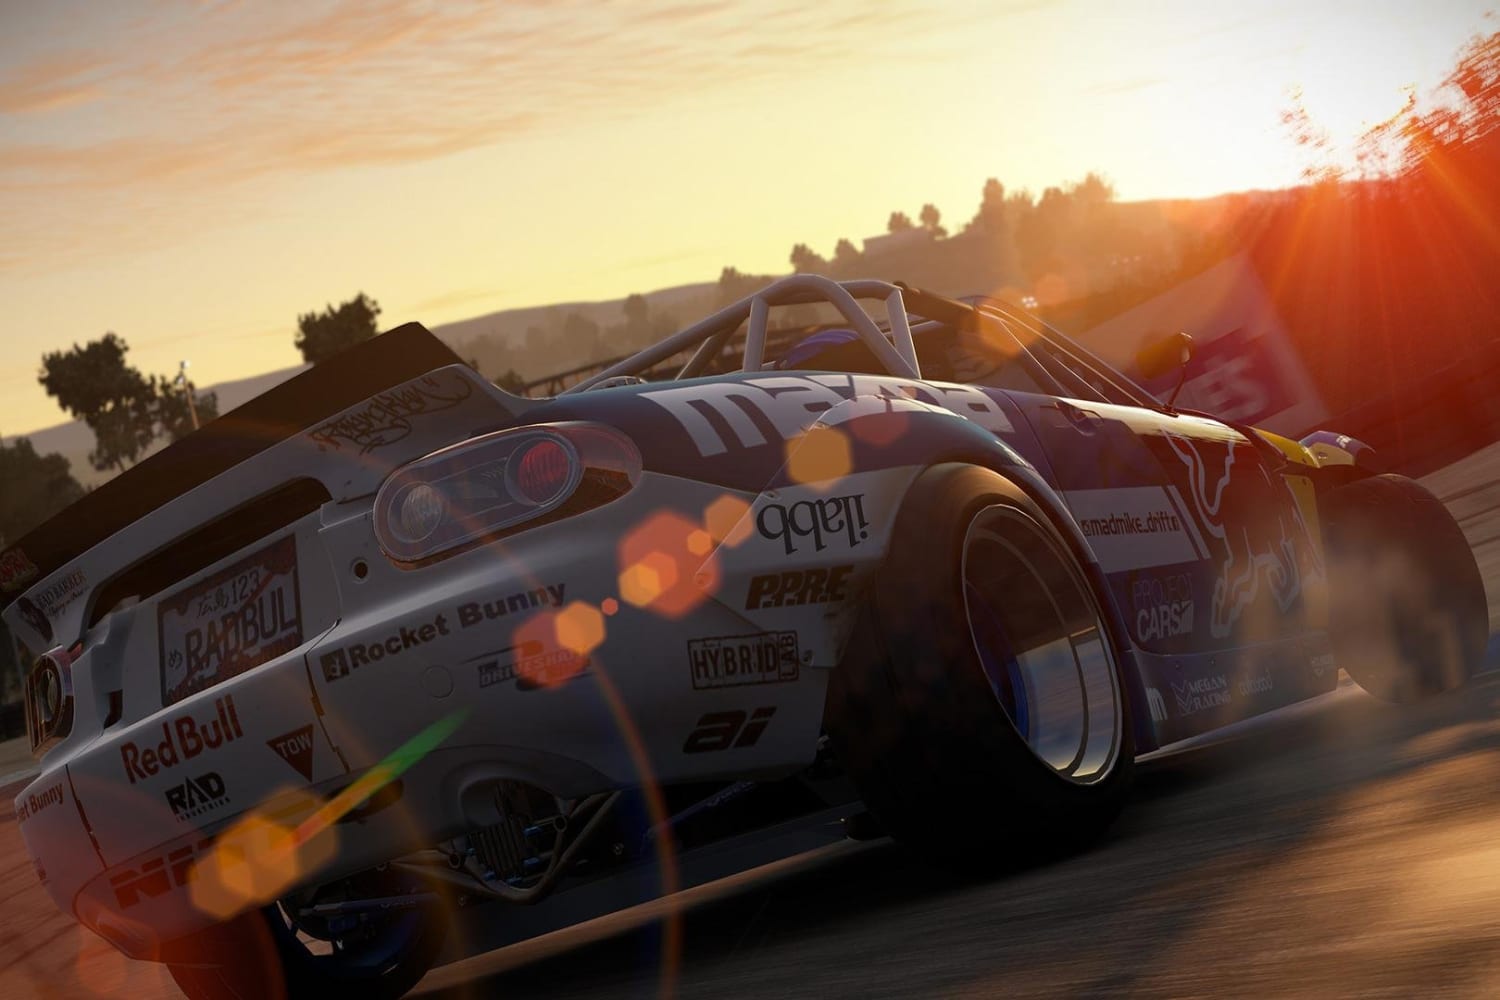 First Impressions – Project CARS on the PS4 – StanceWorks